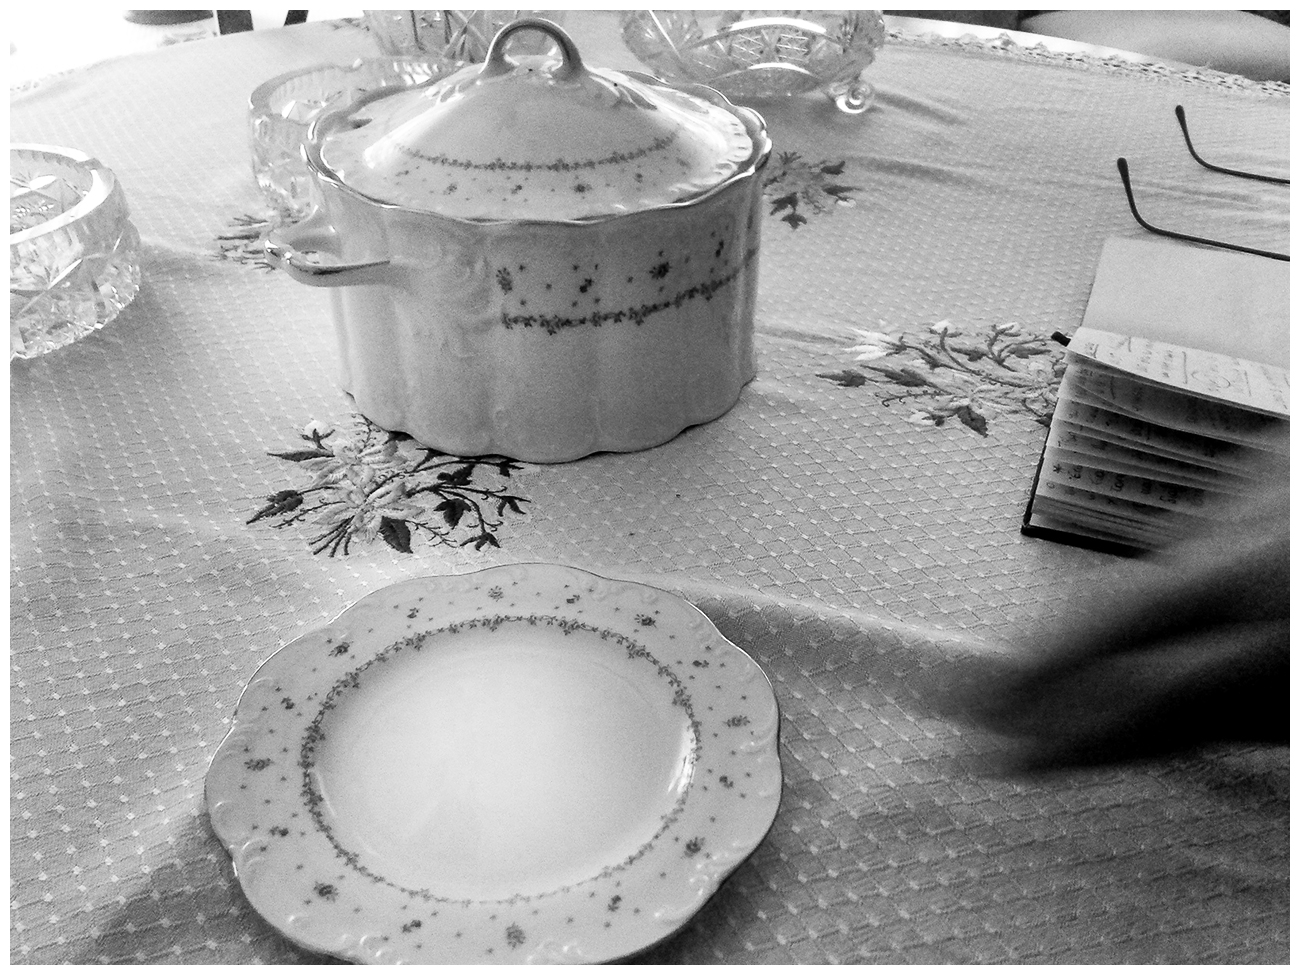 Photograph 2. Porcelain china during an interview in Kato Toumba